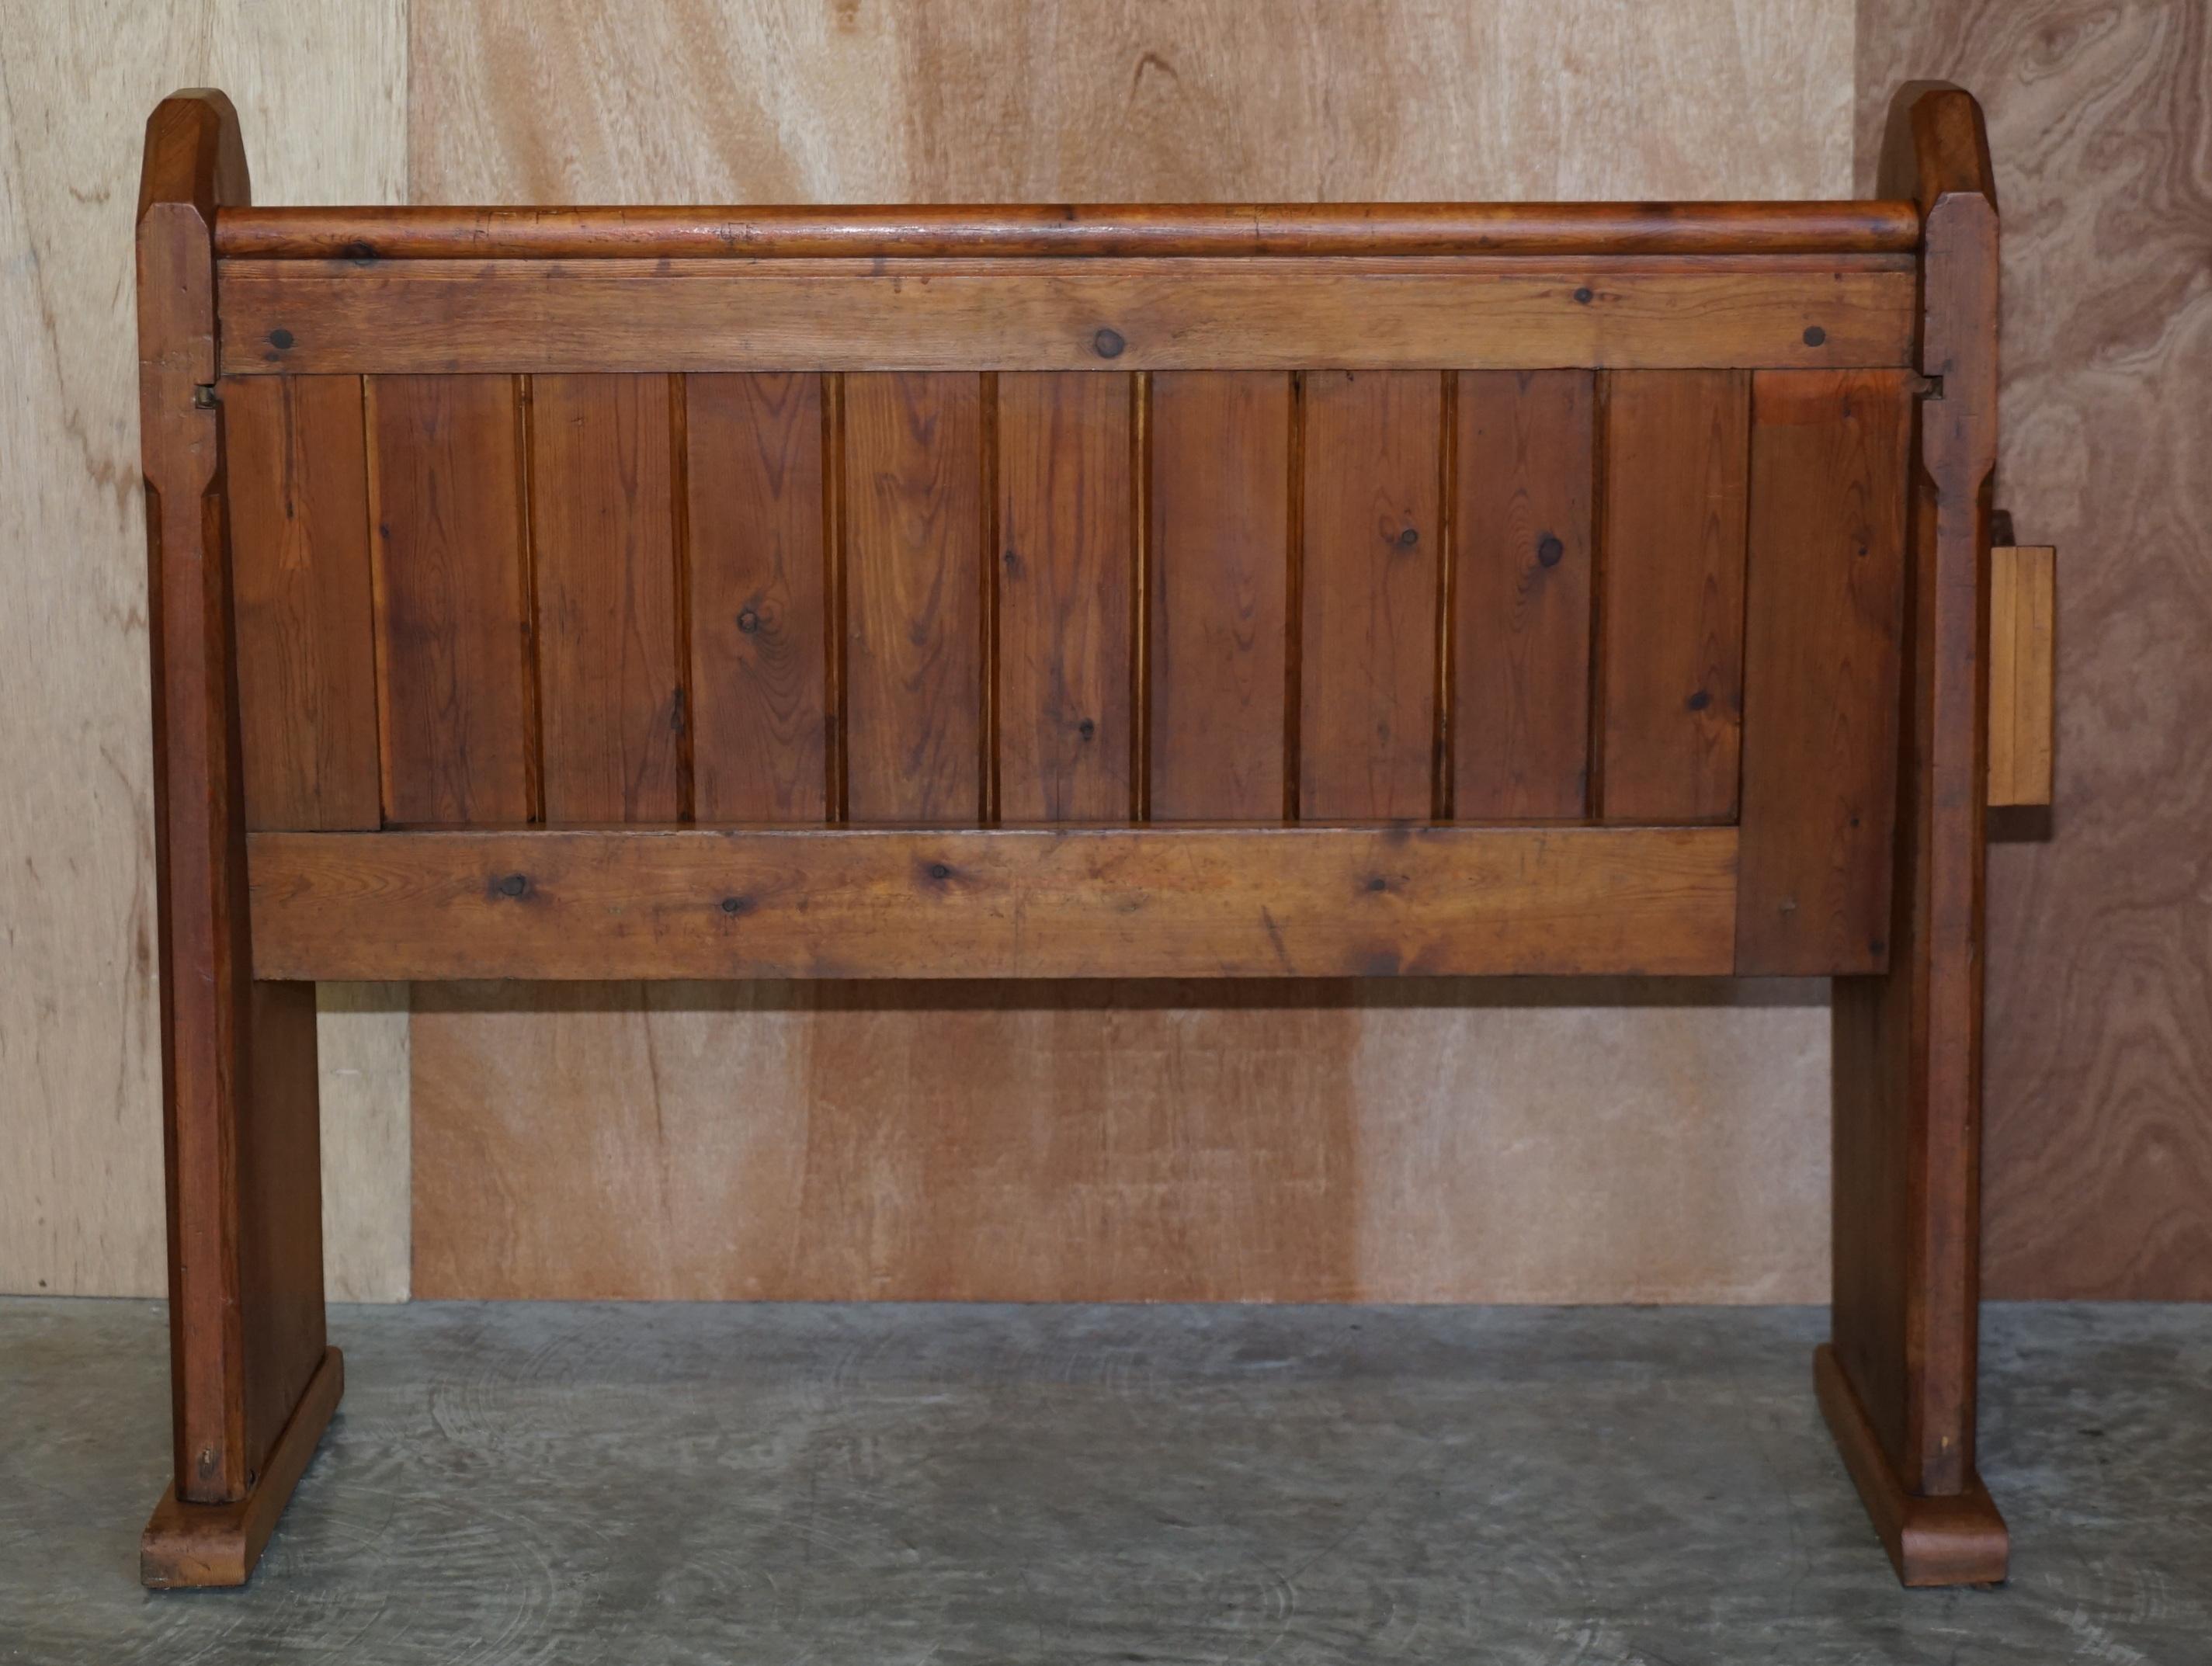 Vintage Liberty's London Ianthe Upholstered Pitch Pine Pew Bench & Footstool For Sale 4